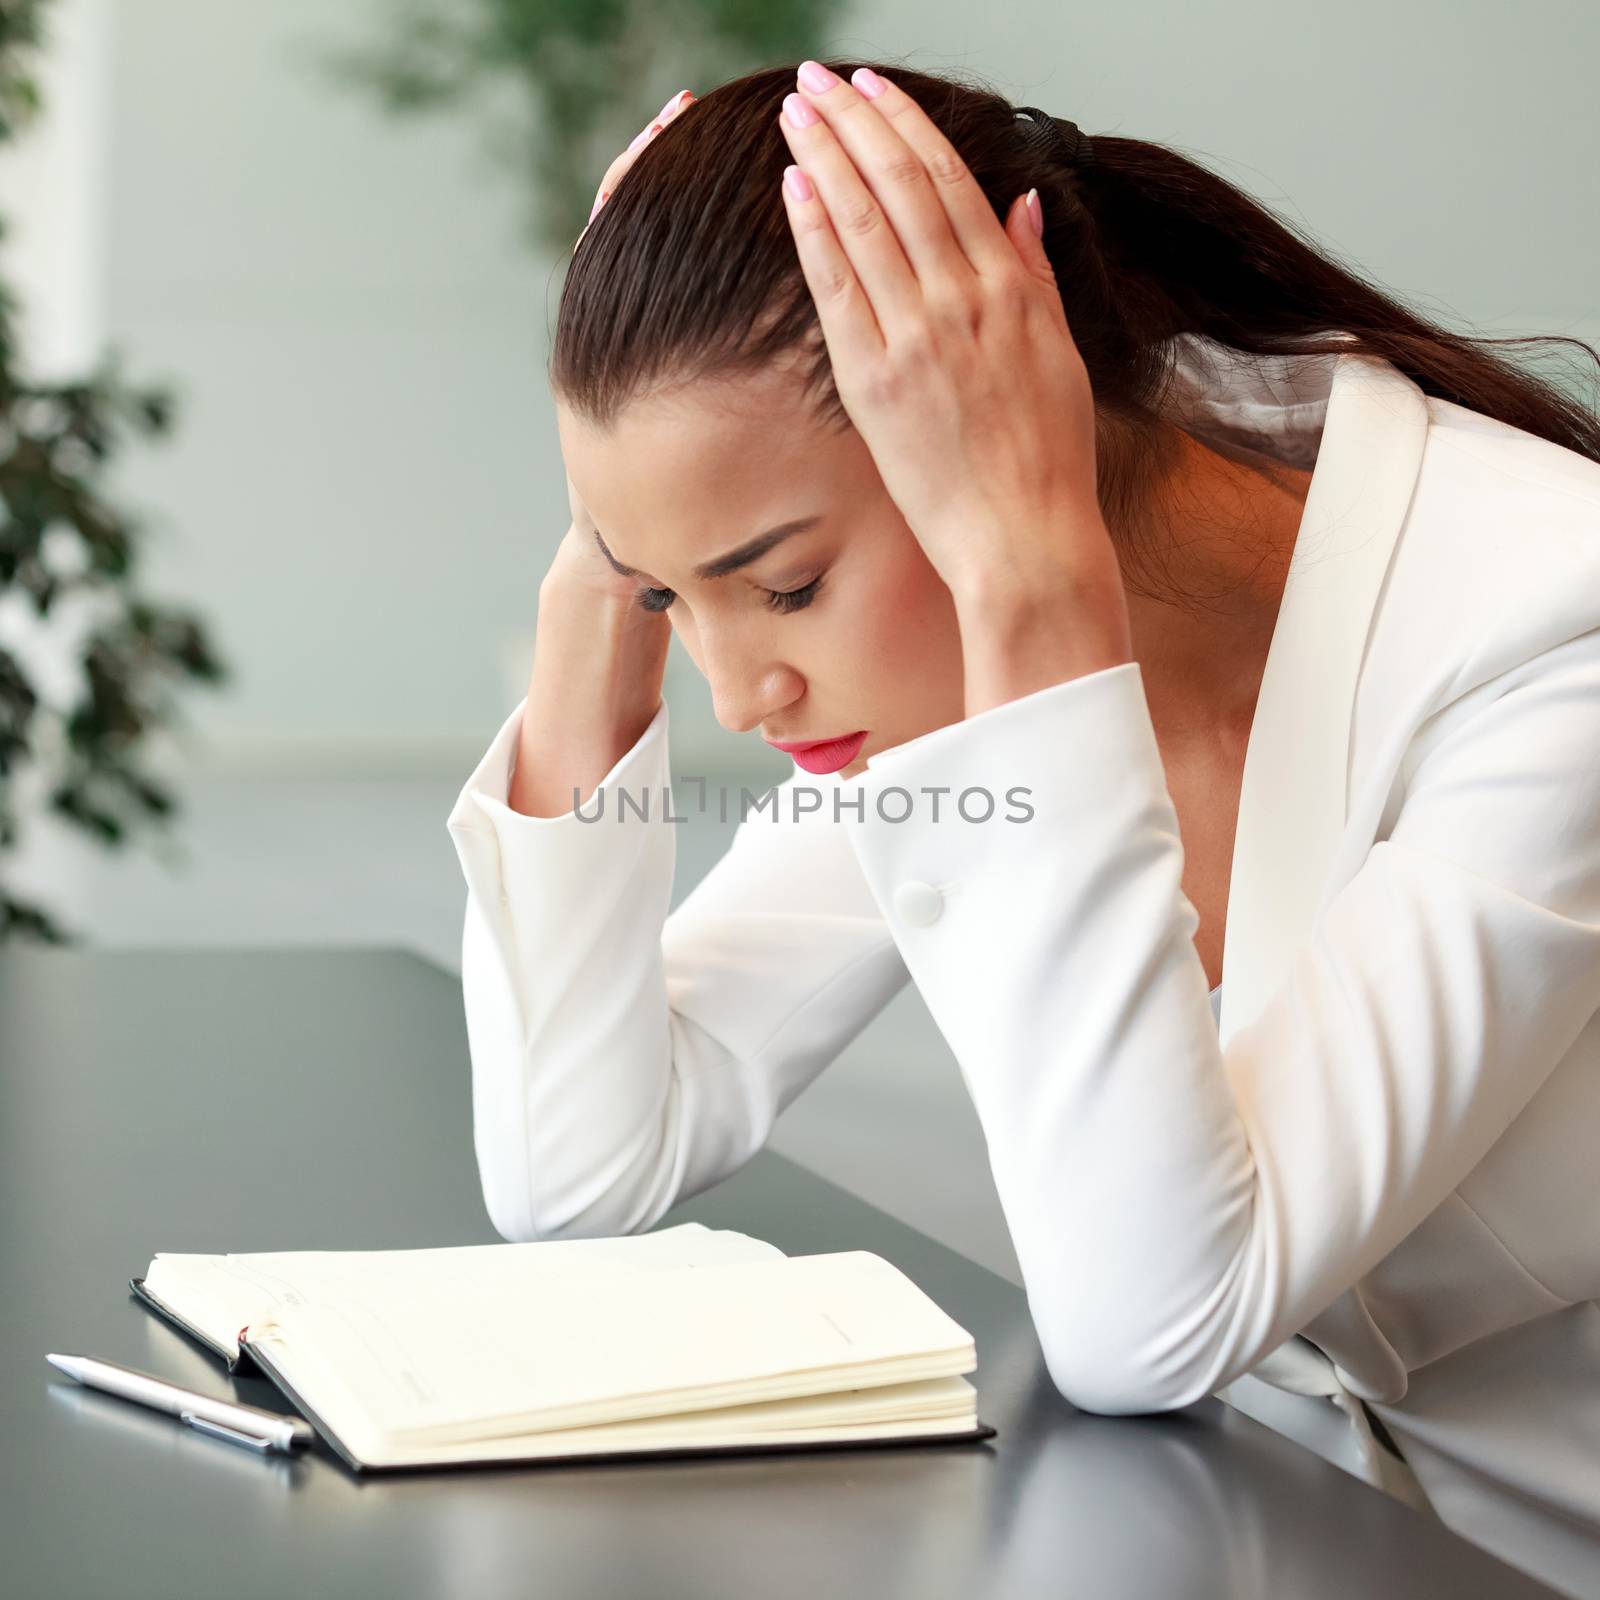 Tired young woman with headache in an office